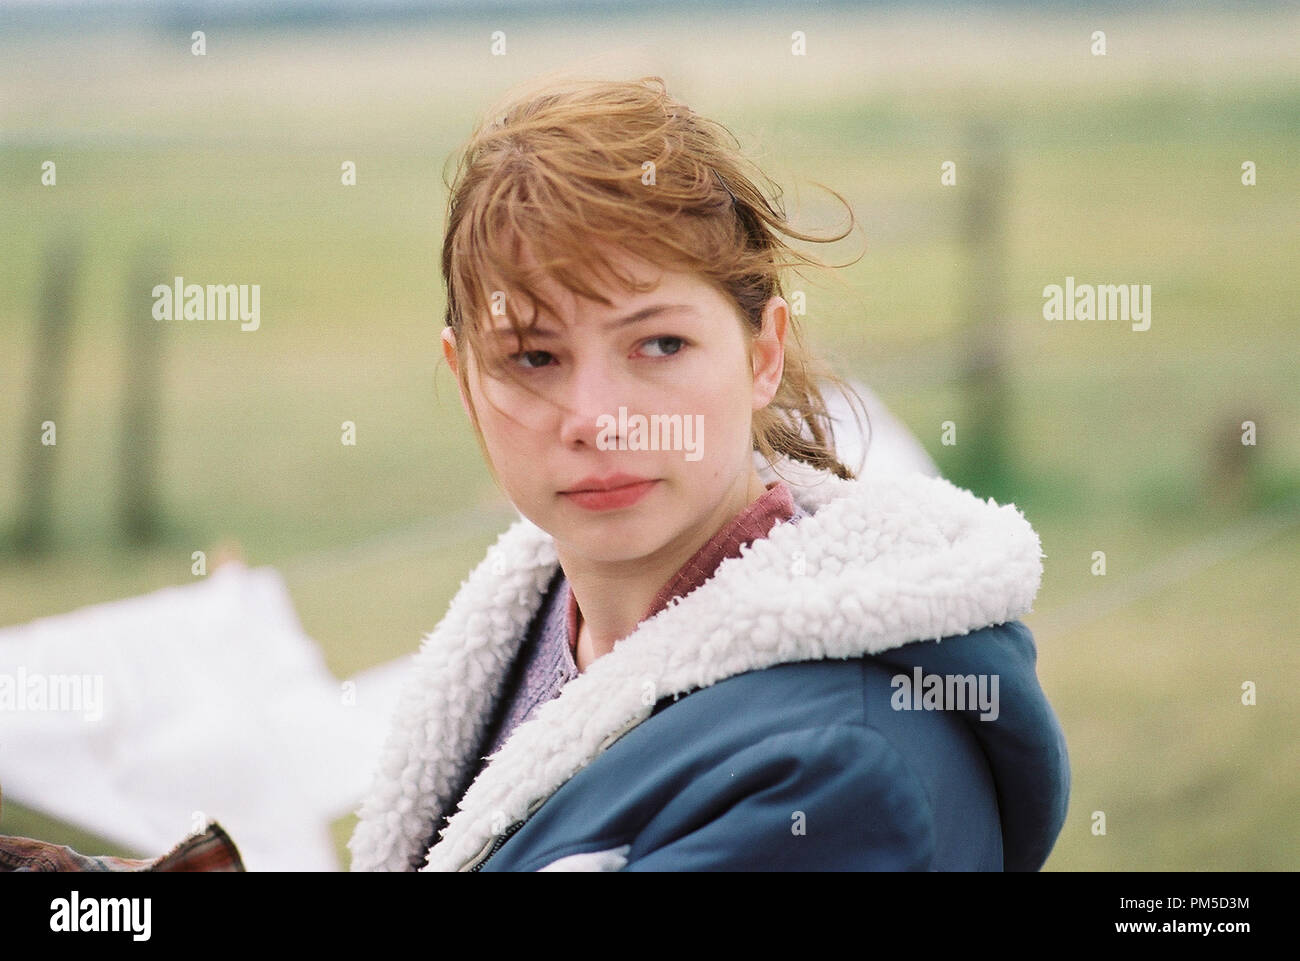 Film Still / Publicity Still from 'Brokeback Mountain'  Michelle Williams © 2005 Focus Features  Photo Credit: Kimberley French   File Reference # 307361401THA  For Editorial Use Only -  All Rights Reserved Stock Photo